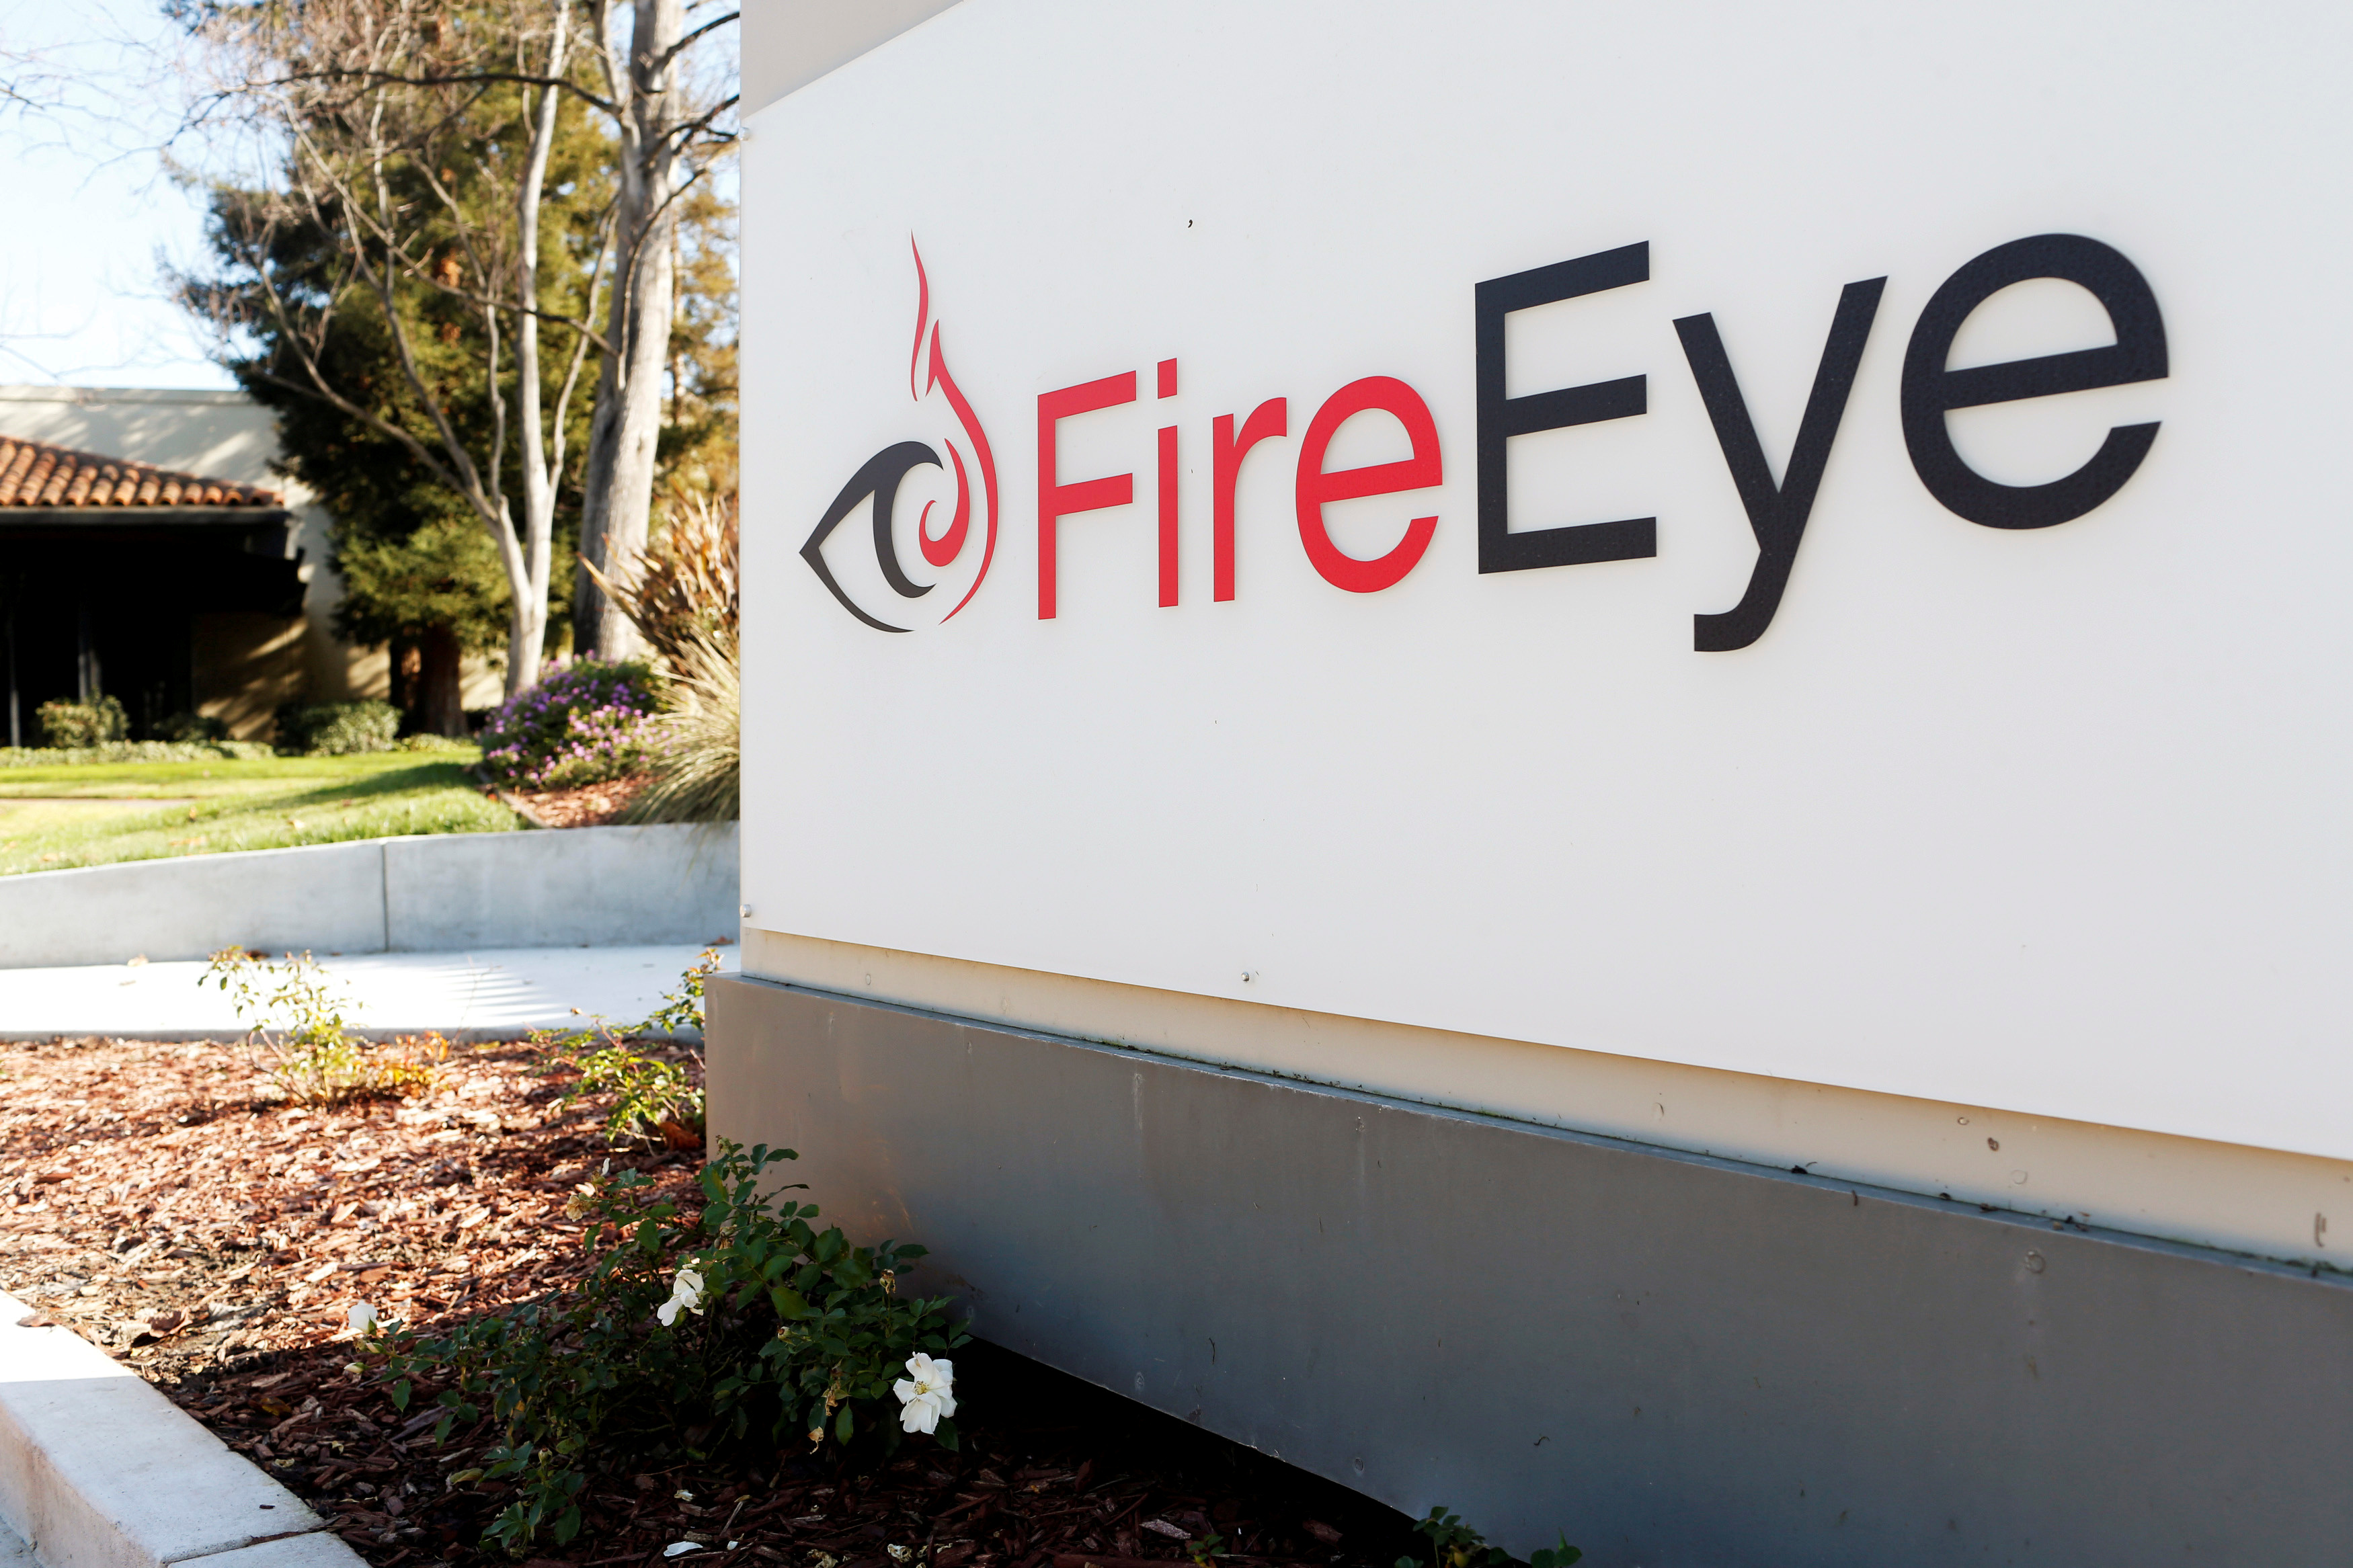 The FireEye logo is seen outside the company's offices in Milpitas, California, December 29, 2014. REUTERS/Beck Diefenbach/File Photo